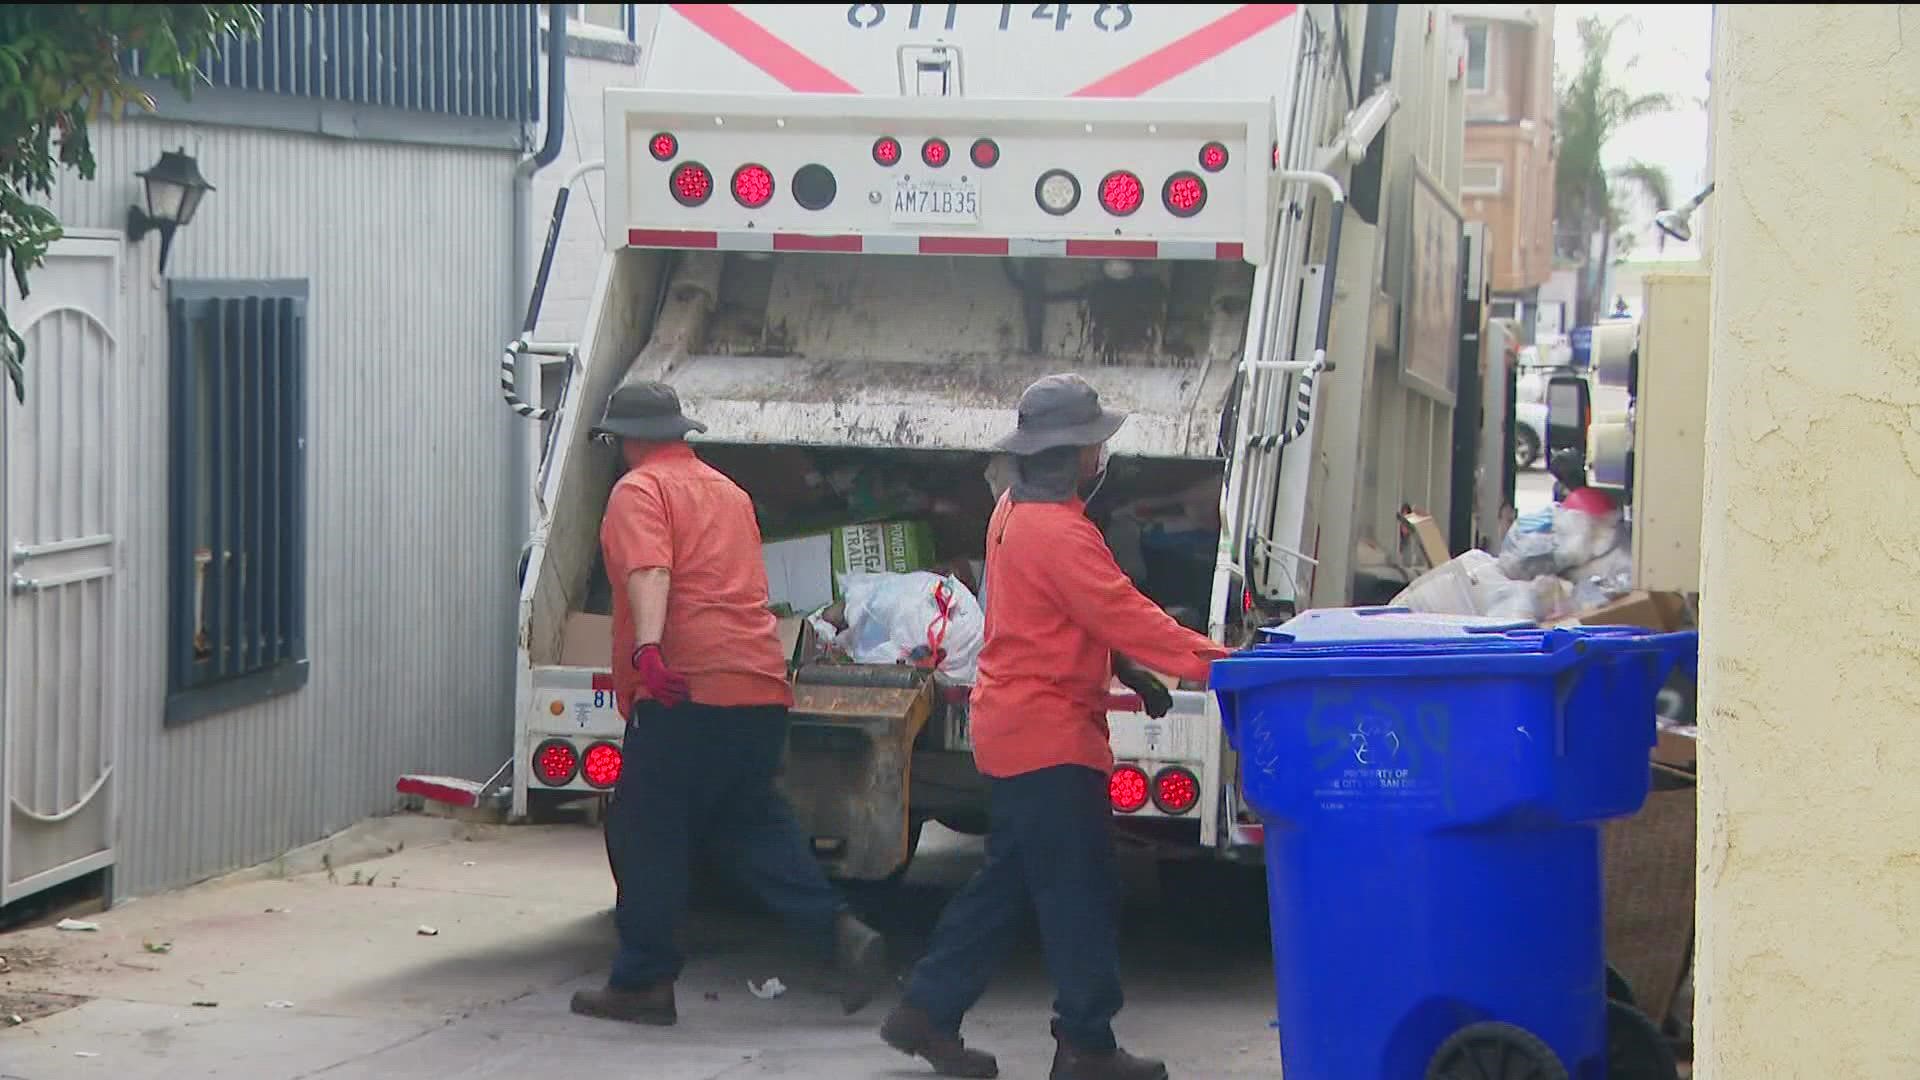 A vote for Measure B means: All residents in the City of San Diego will pay for trash service.